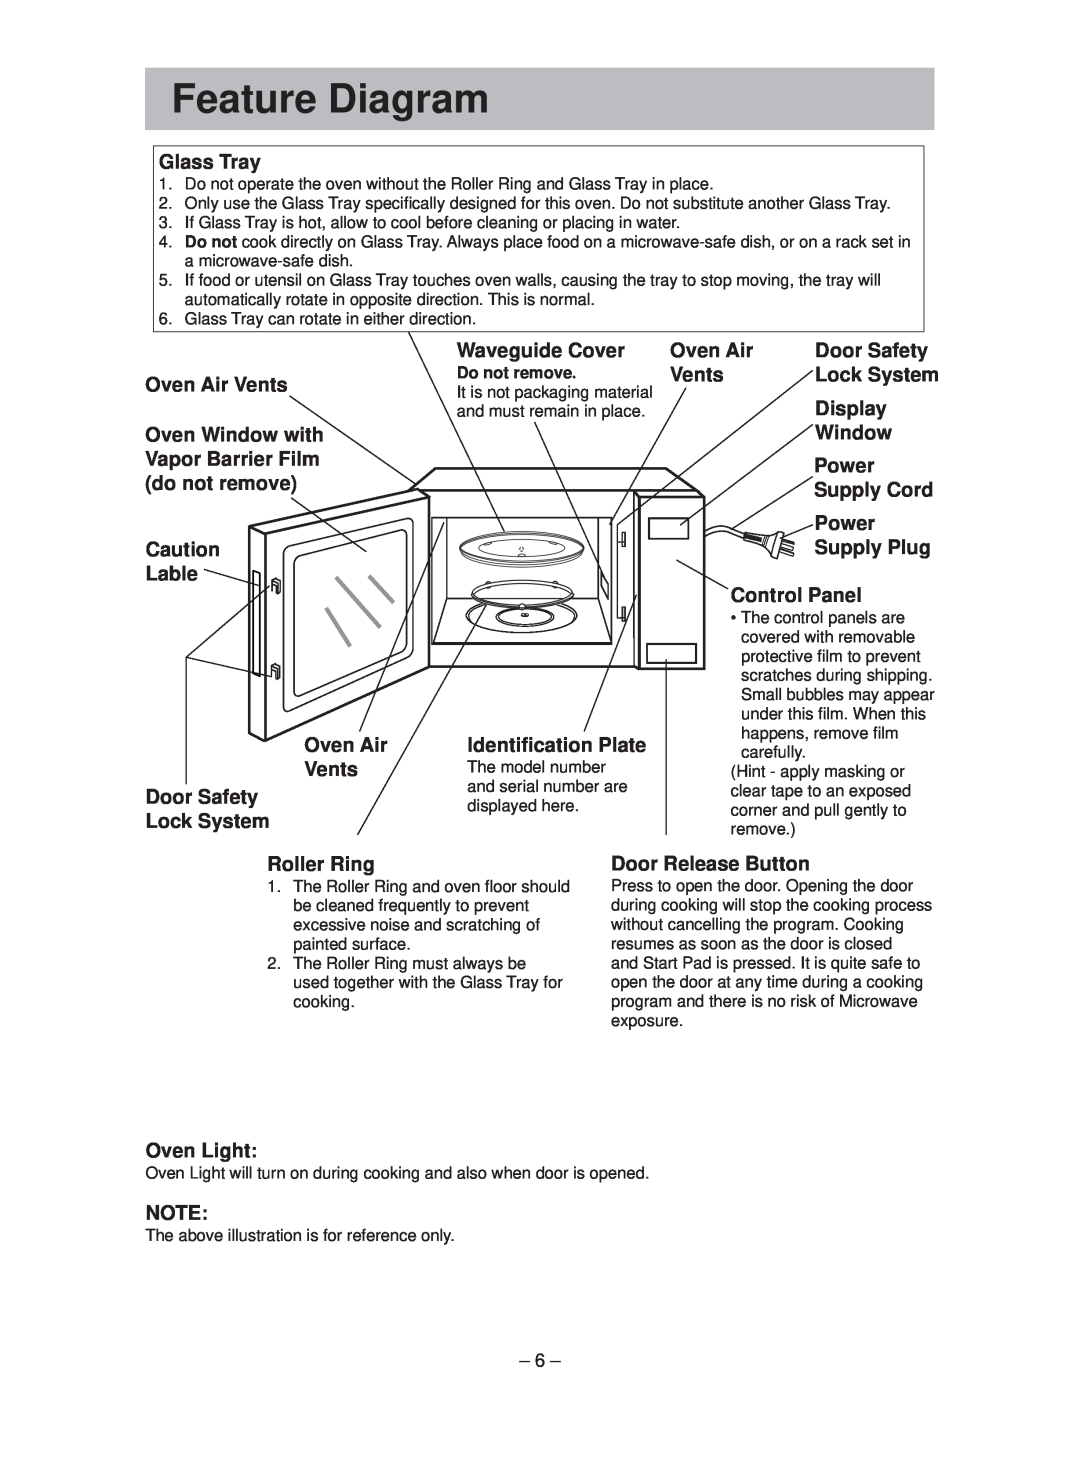 Panasonic NN-ST641W Feature Diagram, Glass Tray, Lable, Waveguide Cover, Oven Air, Door Safety, Vents, Lock System, Window 